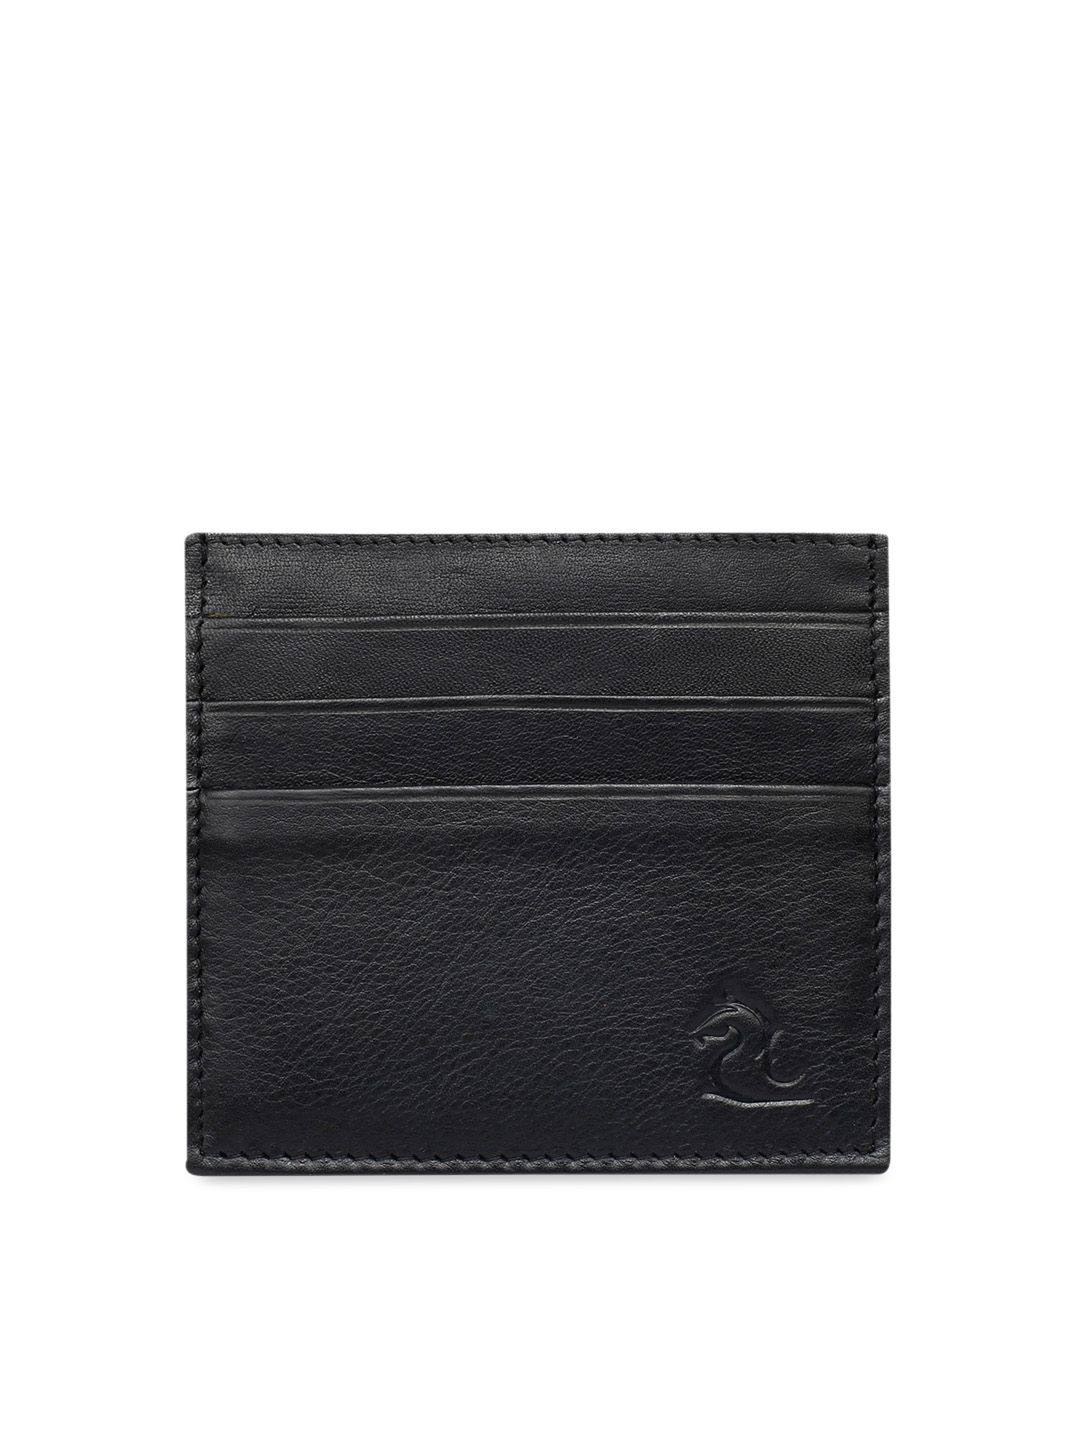 Kara Unisex Black Solid Leather Card Holder Price in India